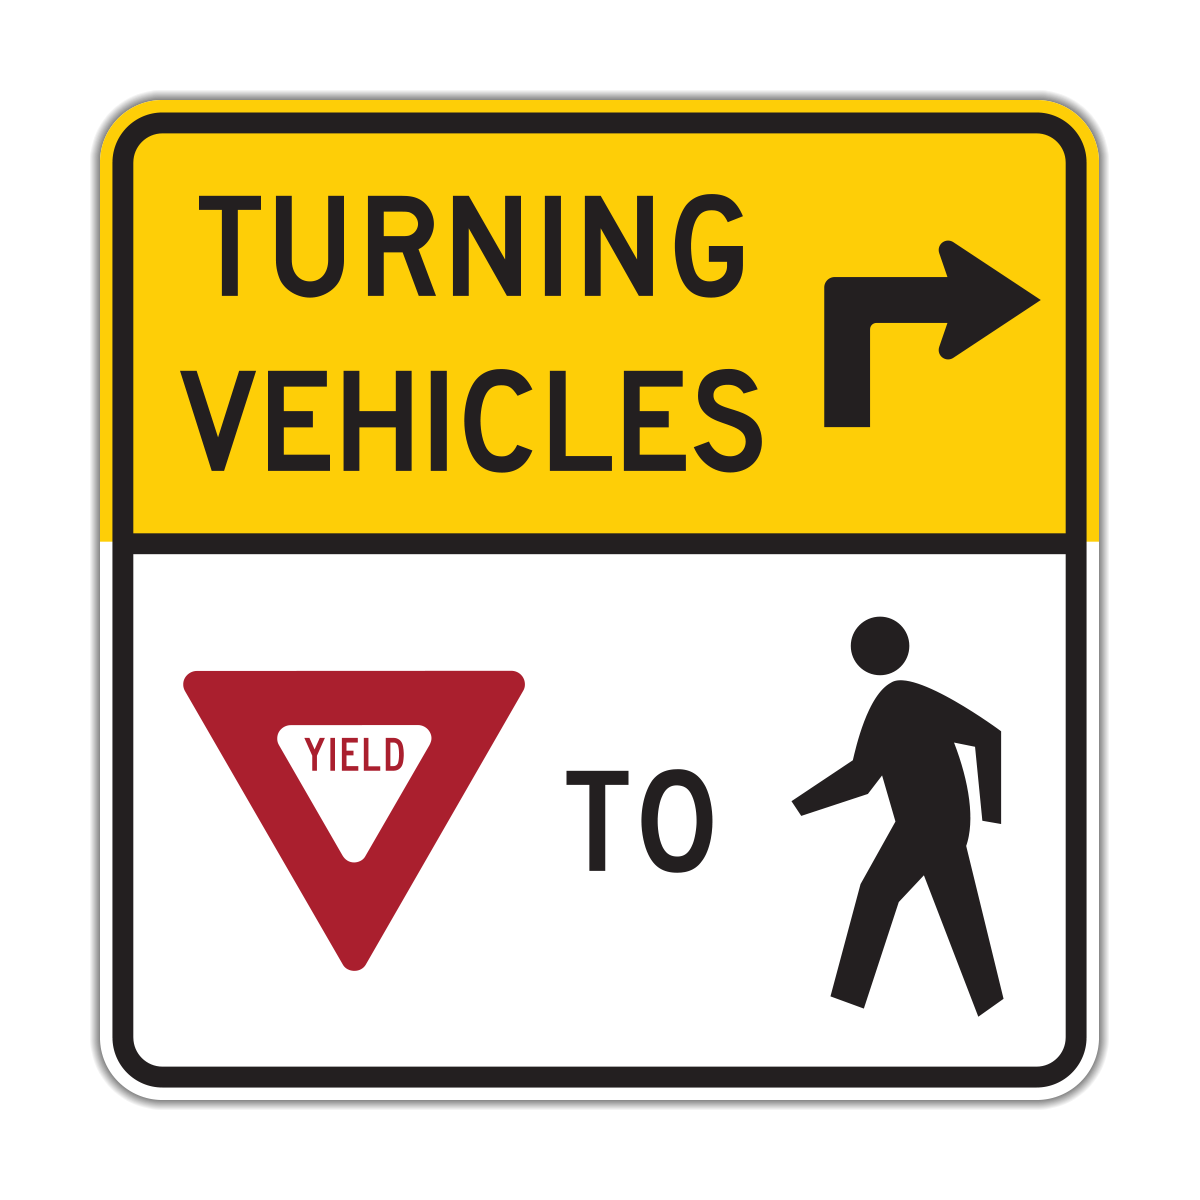 R10-15(L&R) Turning Vehicles Yield To Pedestrians